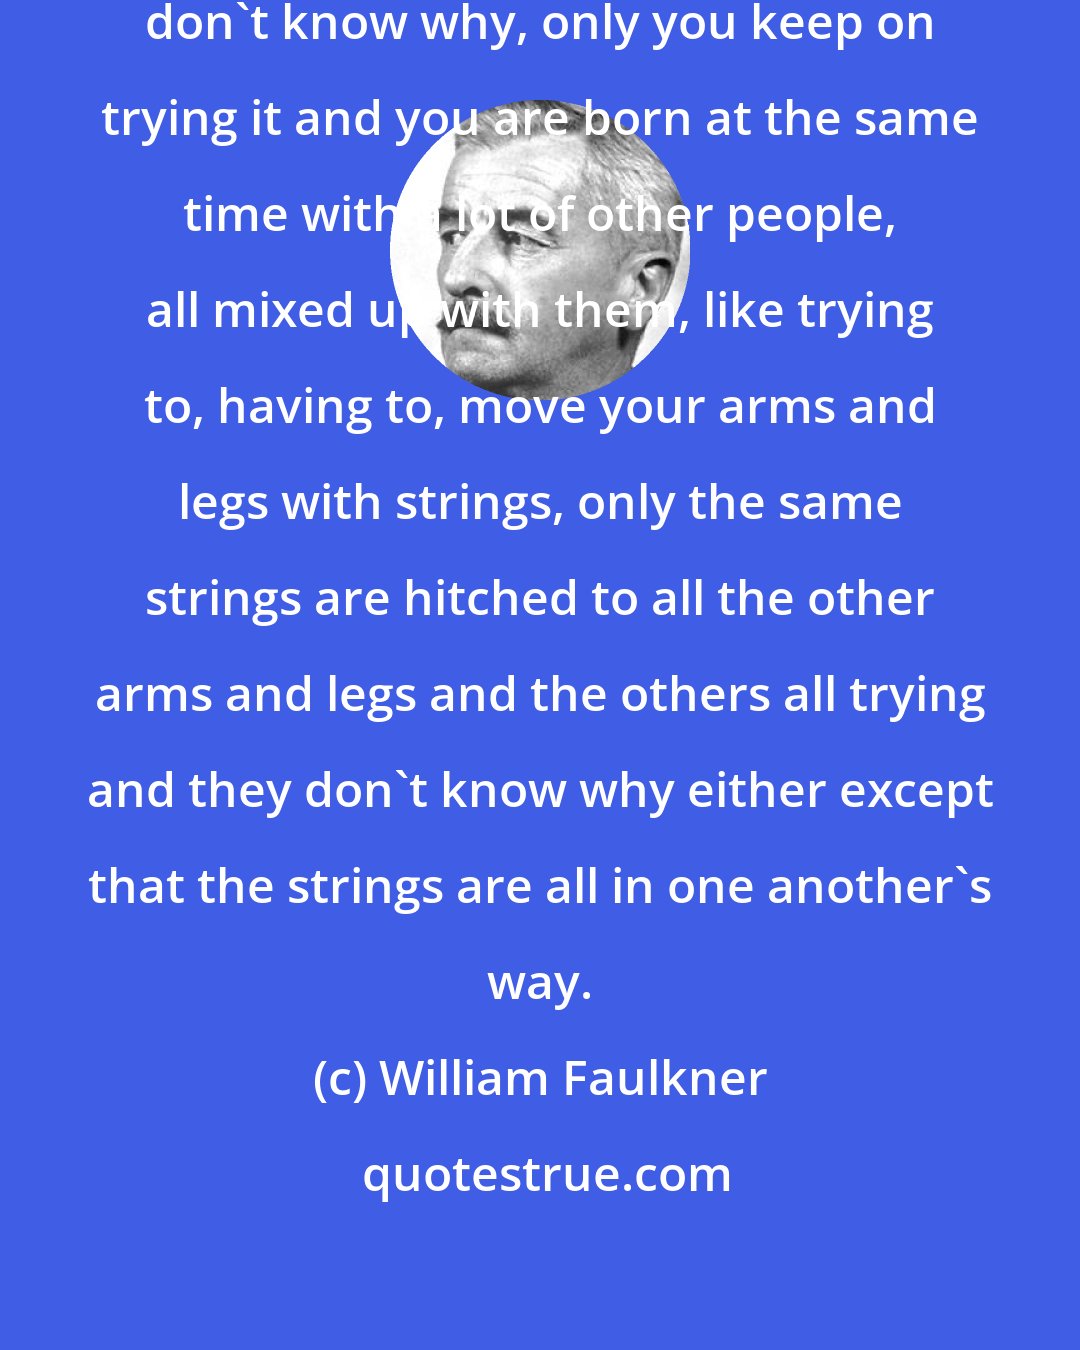 William Faulkner: You get born and you try this and you don't know why, only you keep on trying it and you are born at the same time with a lot of other people, all mixed up with them, like trying to, having to, move your arms and legs with strings, only the same strings are hitched to all the other arms and legs and the others all trying and they don't know why either except that the strings are all in one another's way.